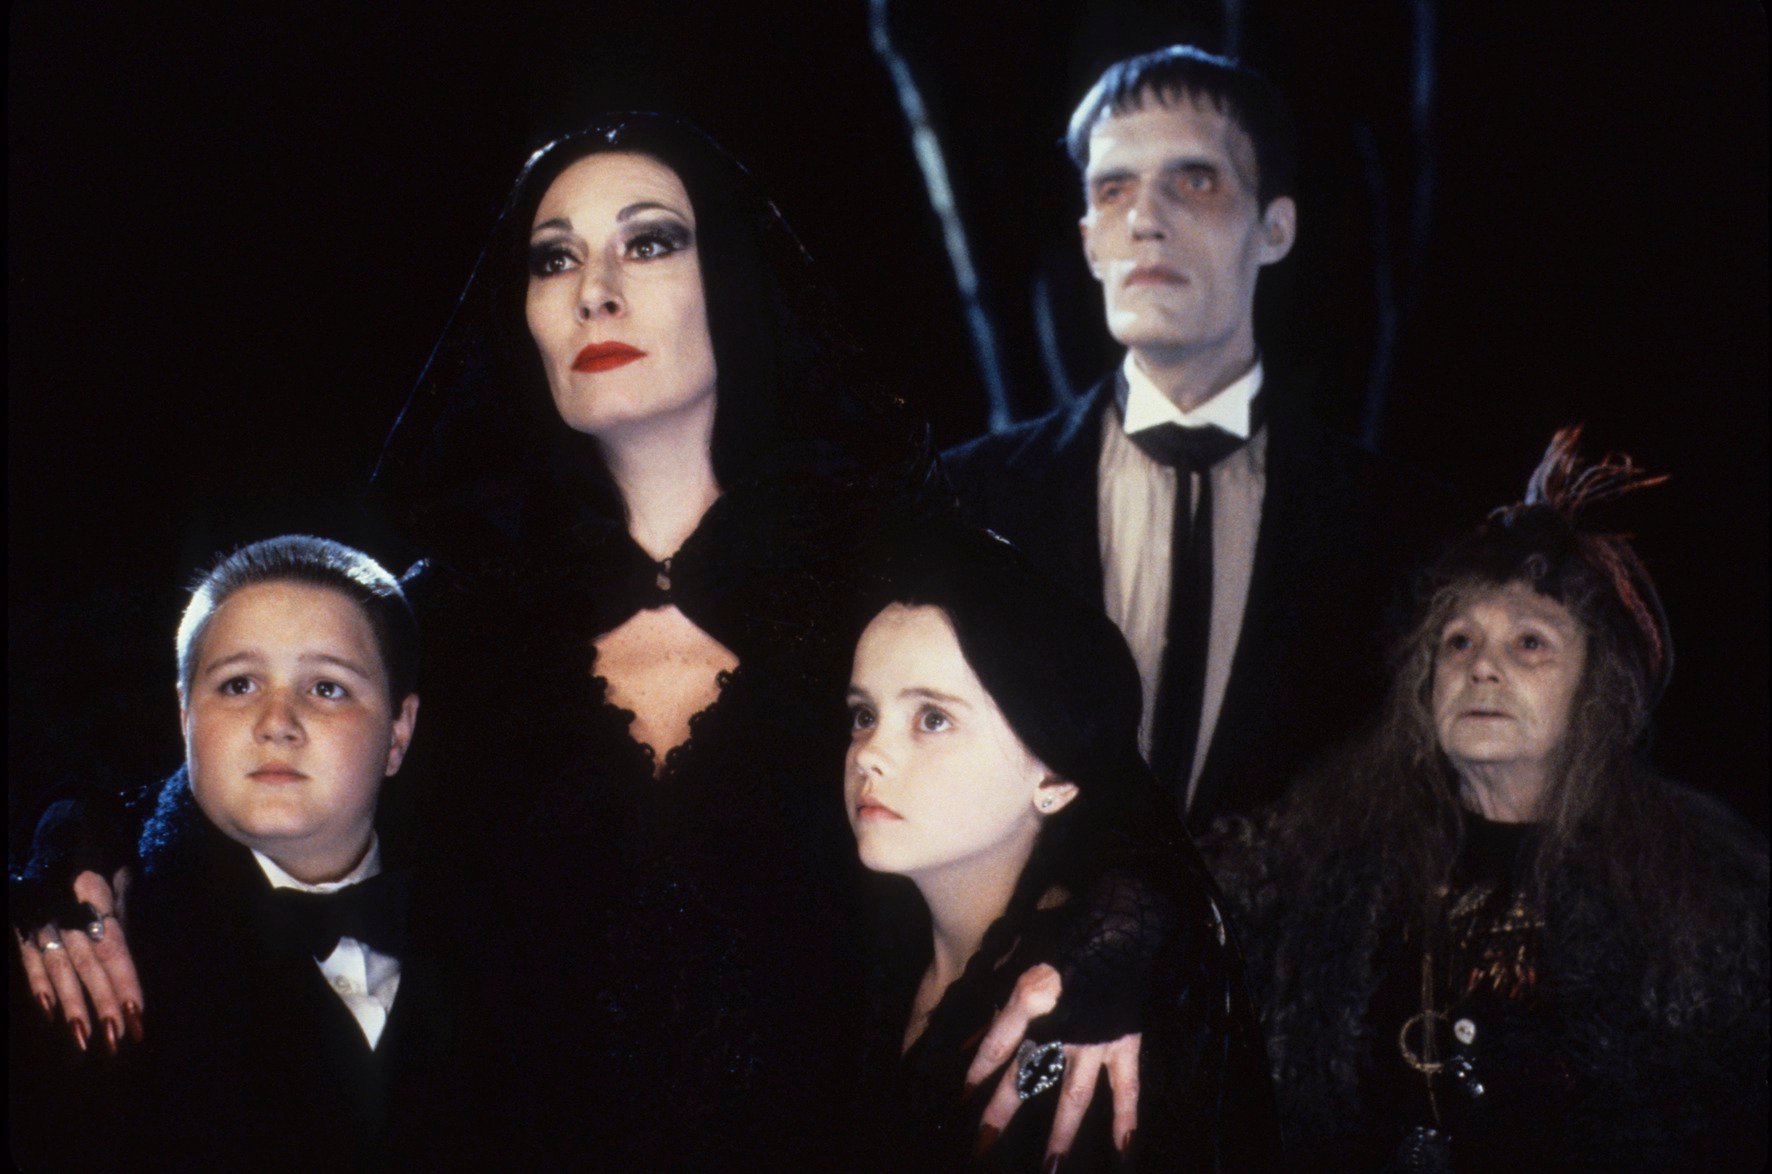 Will Bring 'The Addams Family' to TV Years After On the Movie